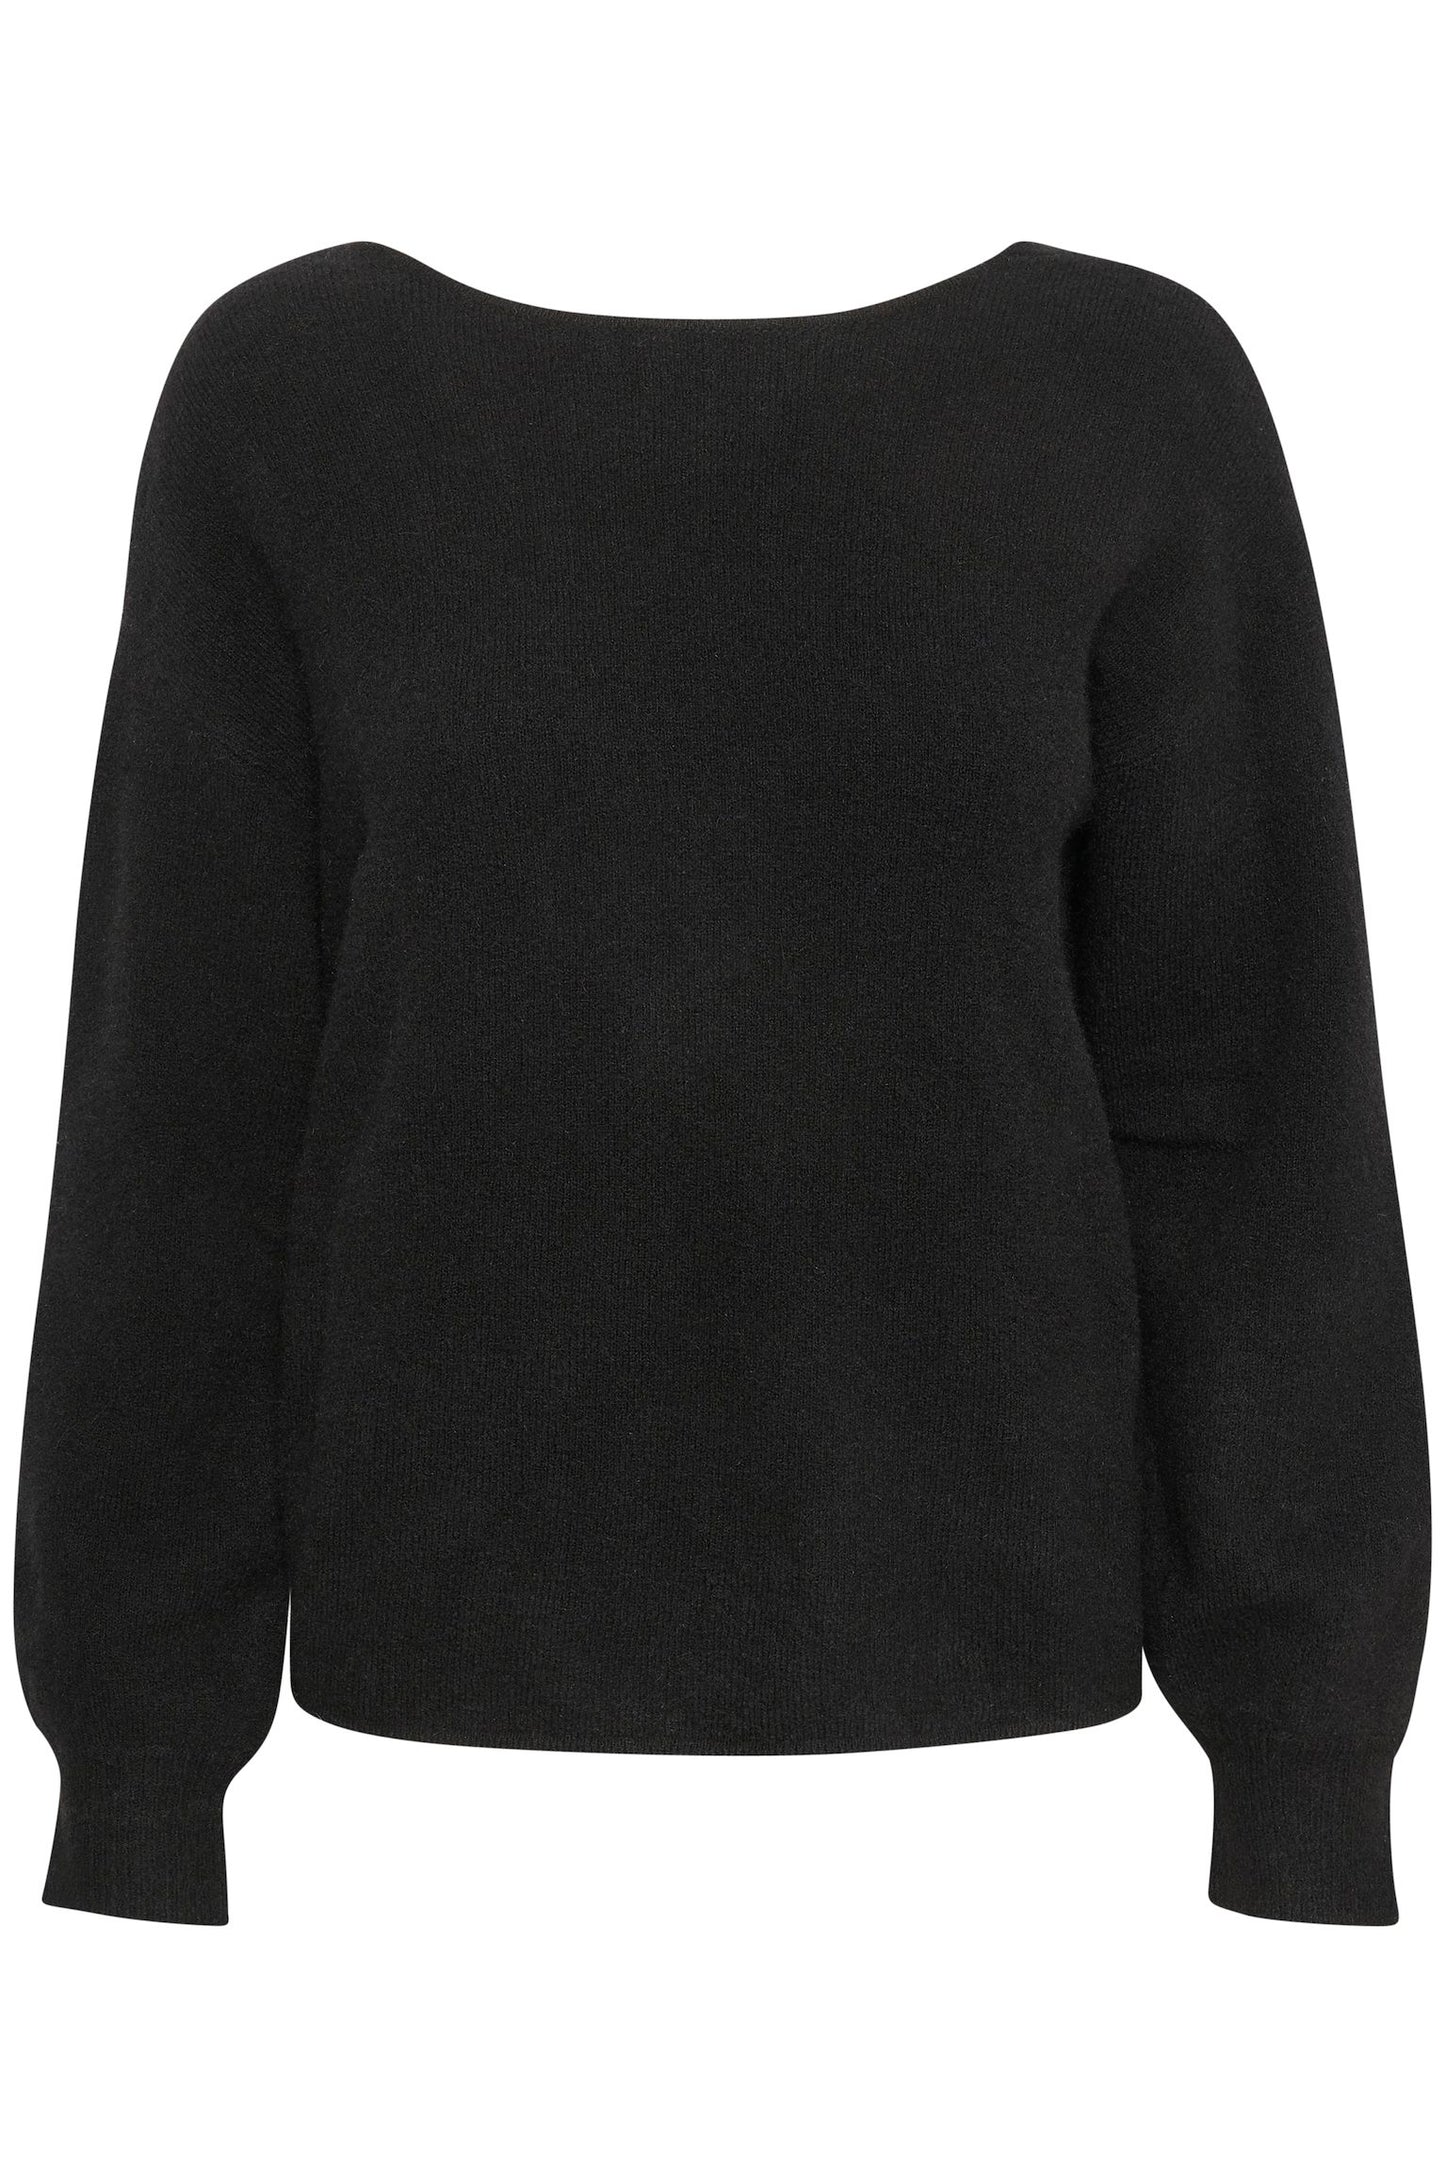 Sherry Knot Pullover - My Essential Wardrobe